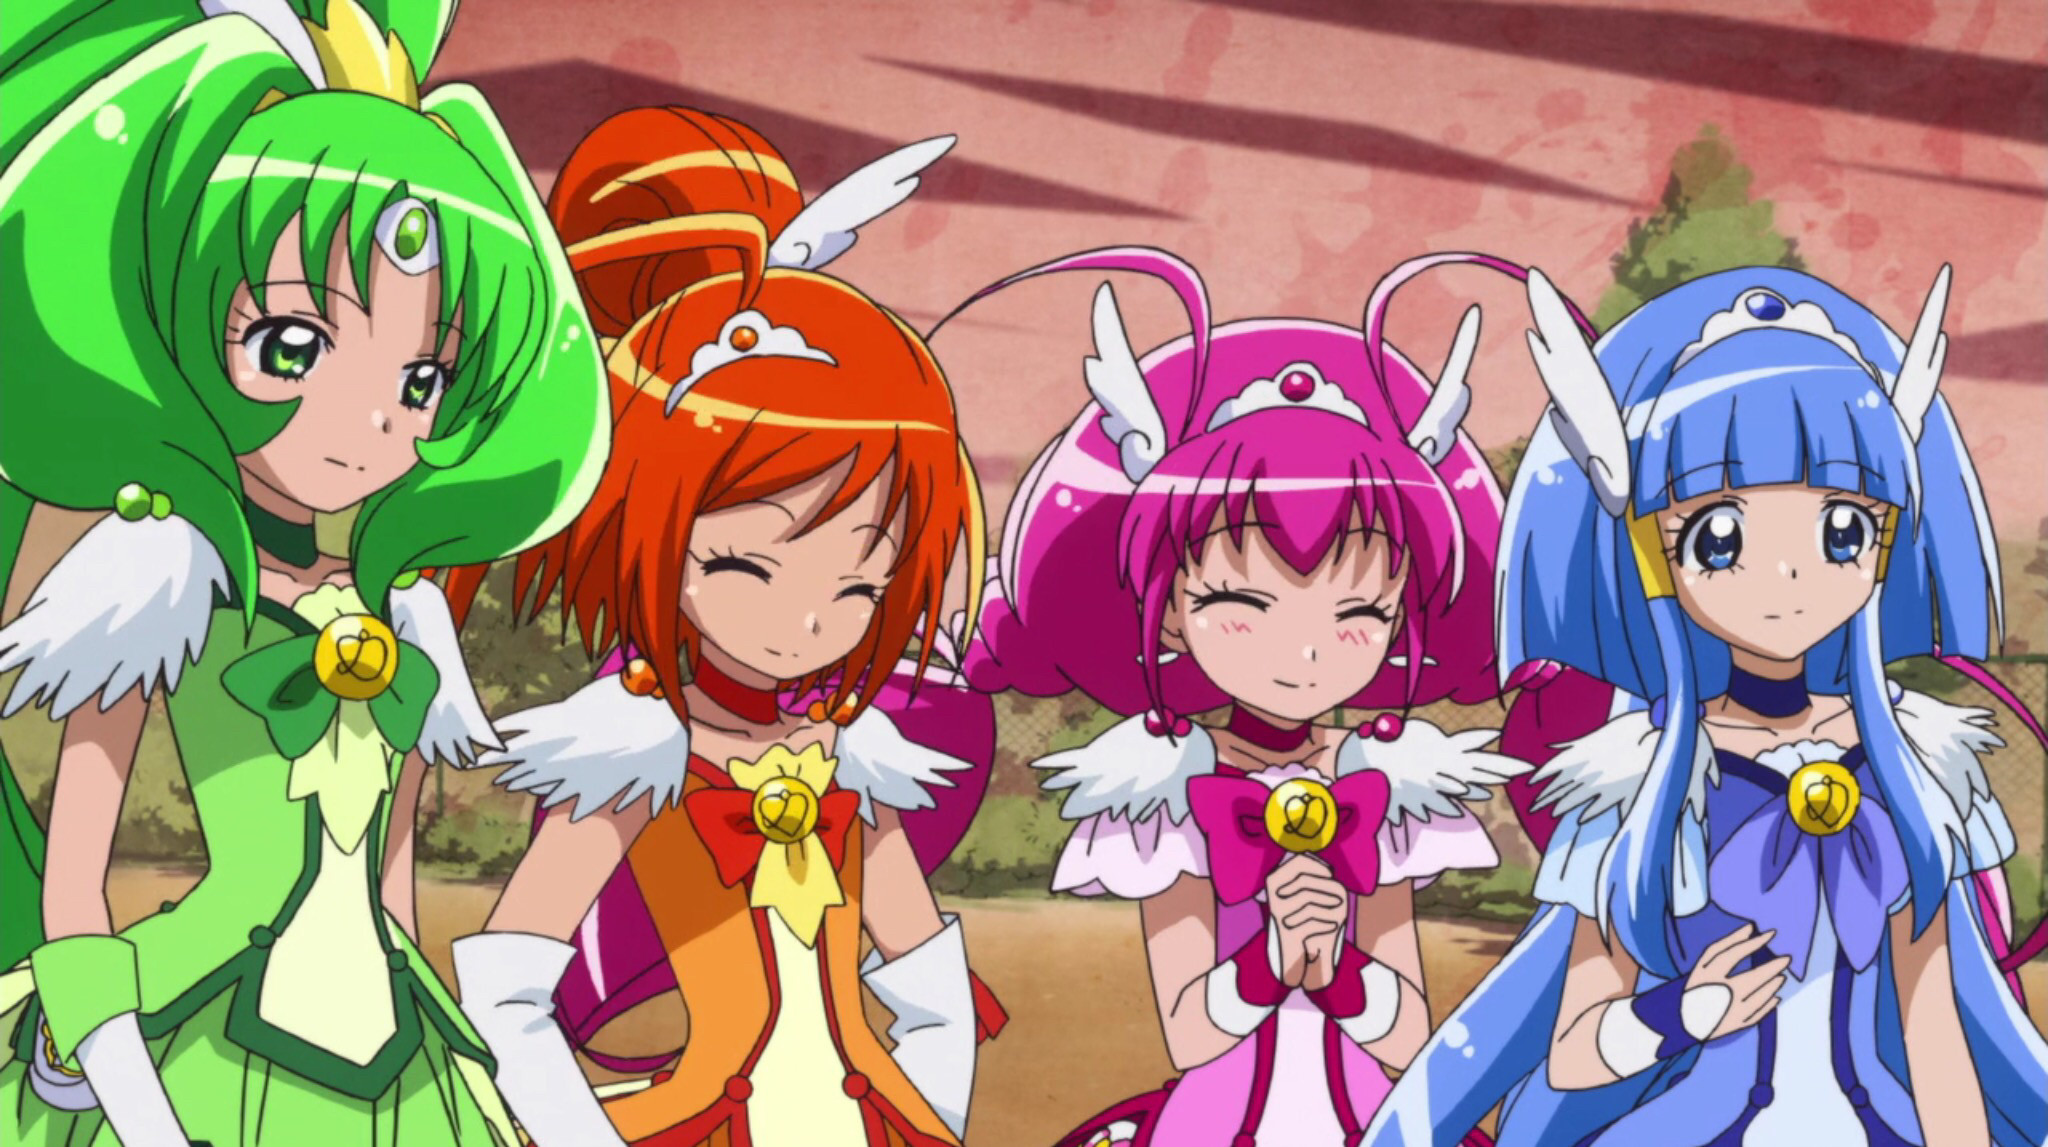 4 of the Glitter Force